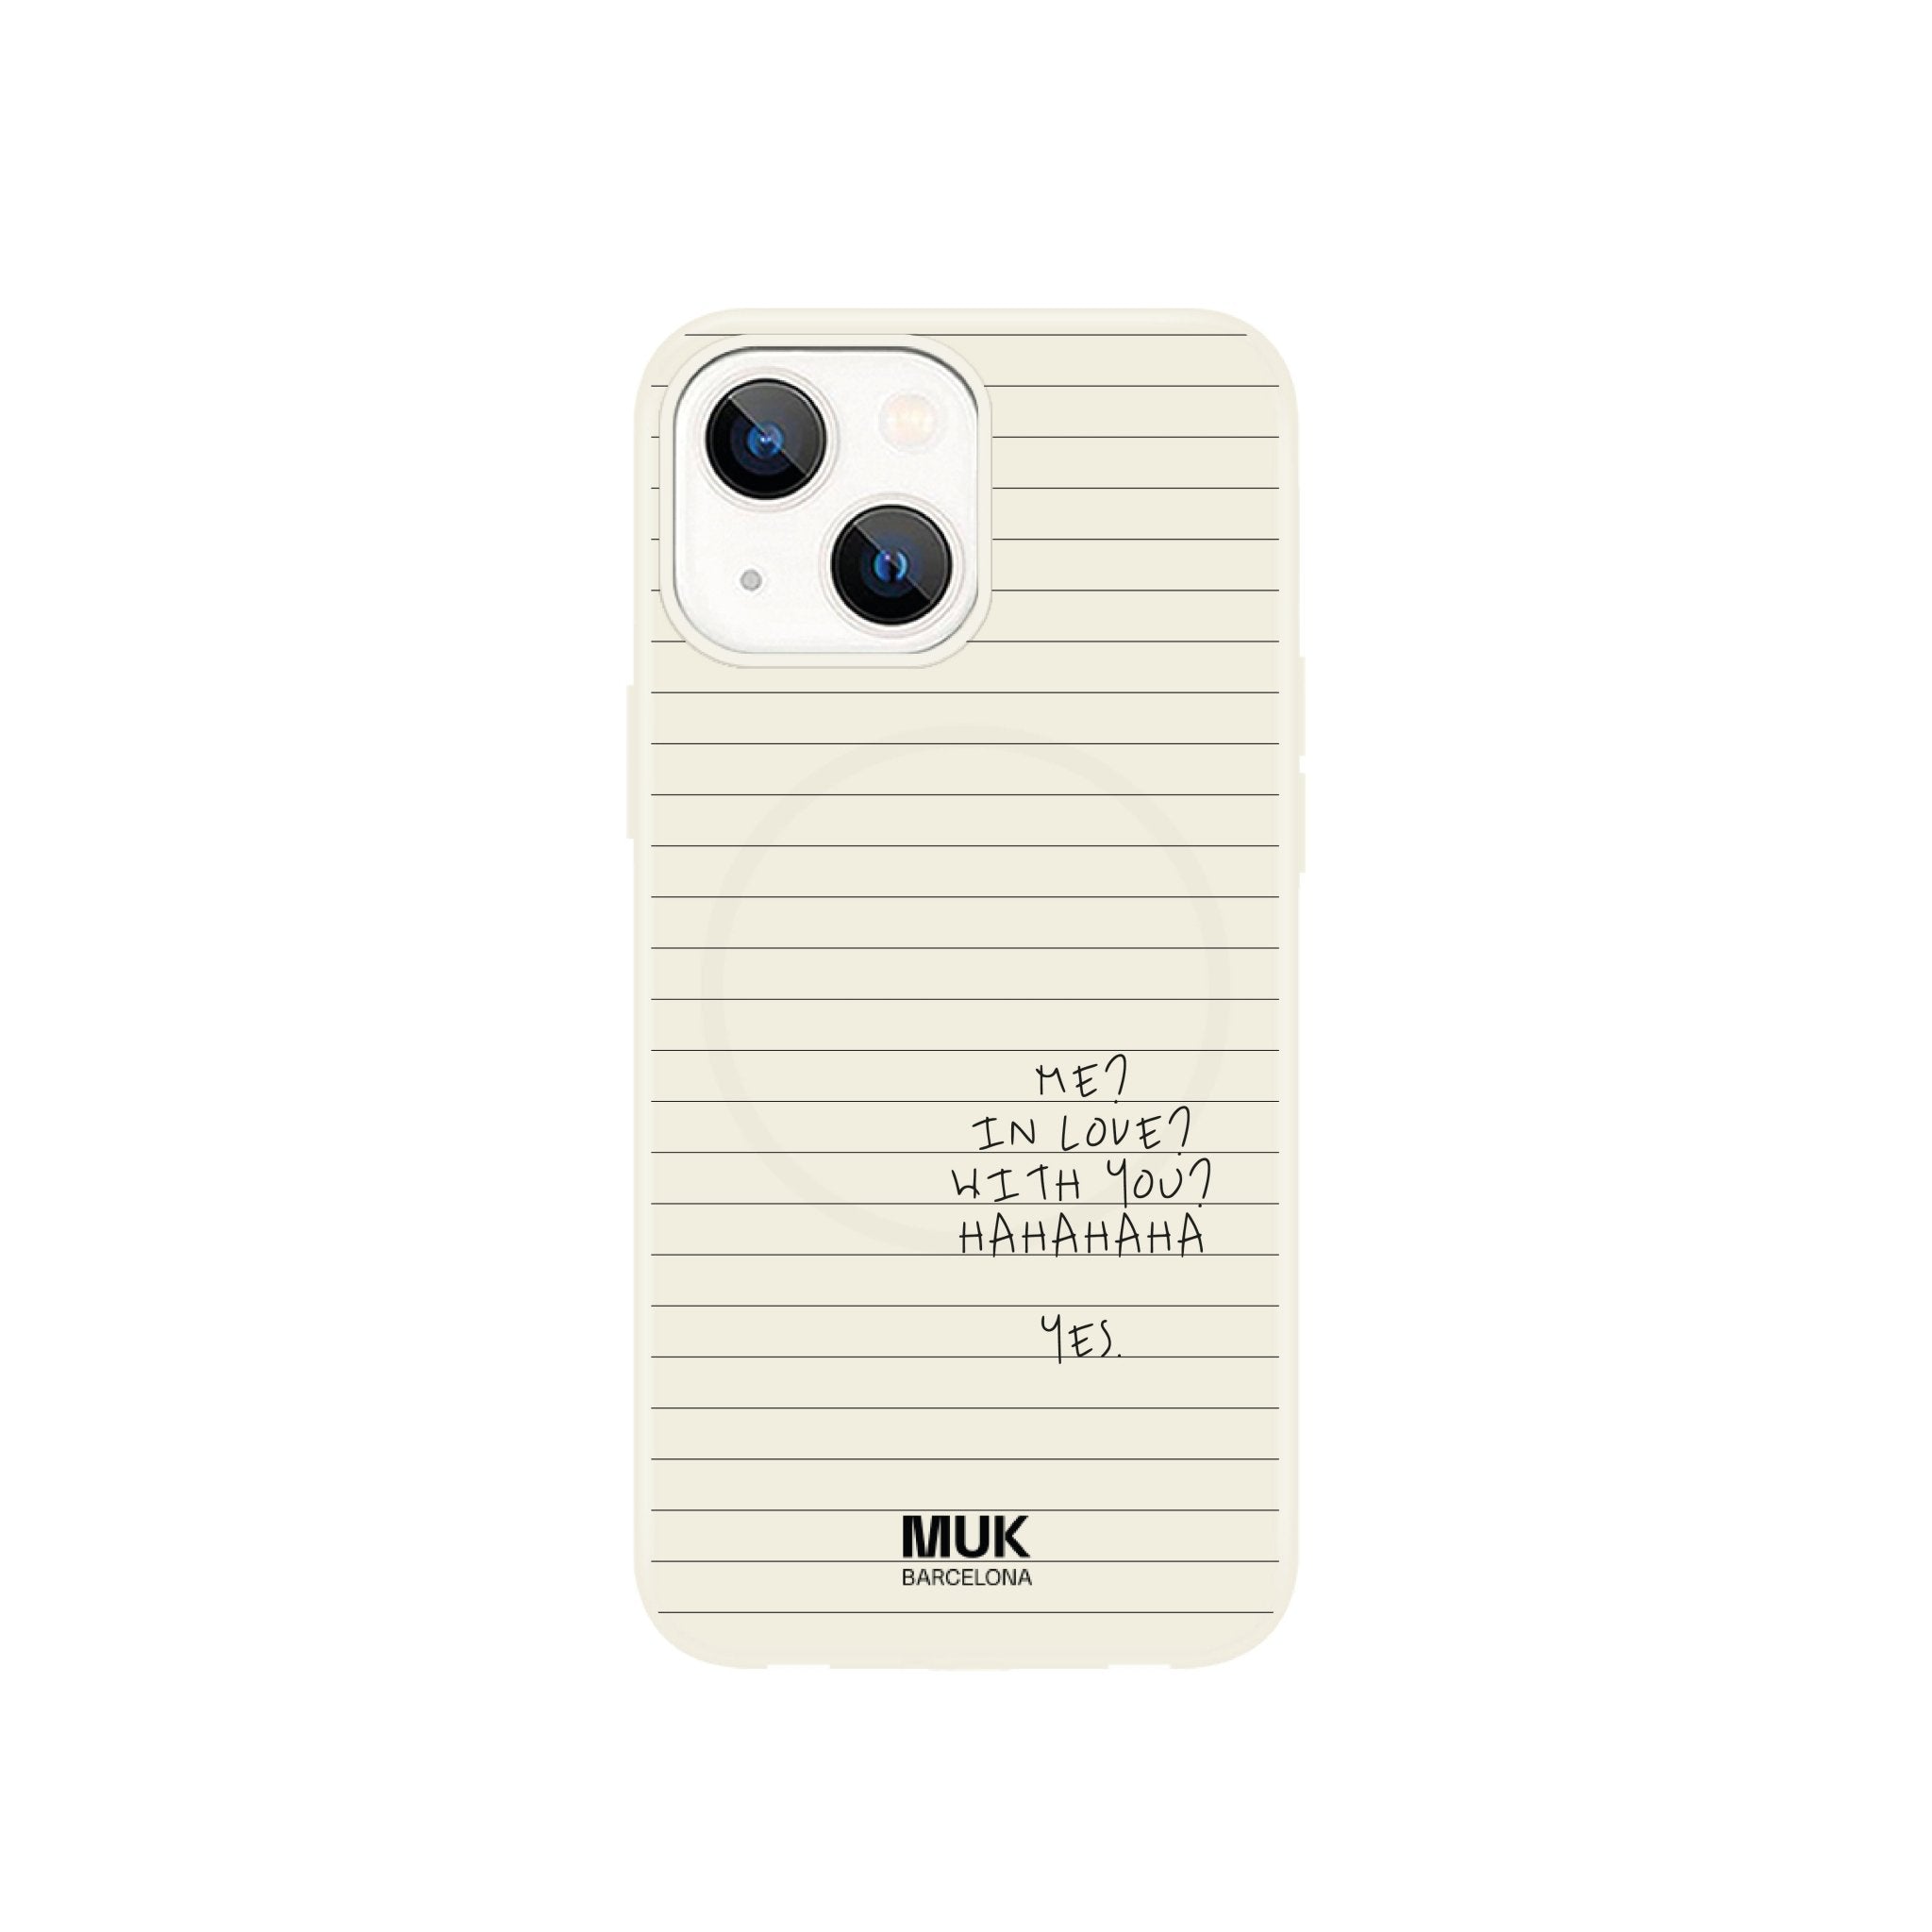 Muklace stone color phone case with stone graycustomizable text. Mobile cases with wireless charging (iPhone 12 and up).
